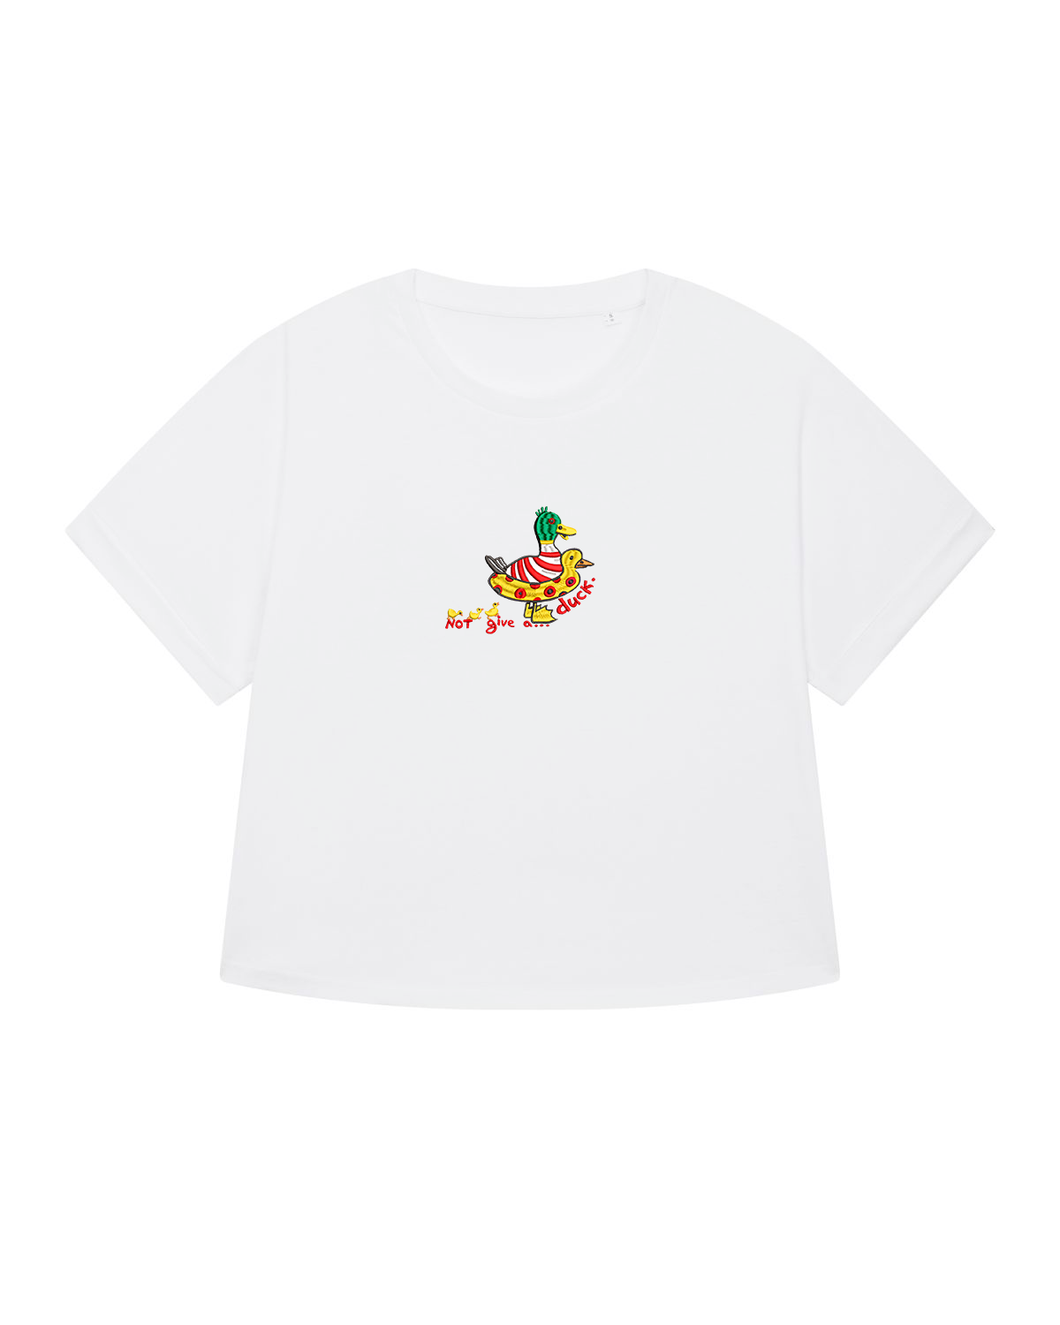 Not give a...duck. 🦆  - Embroidered women's t-shirt